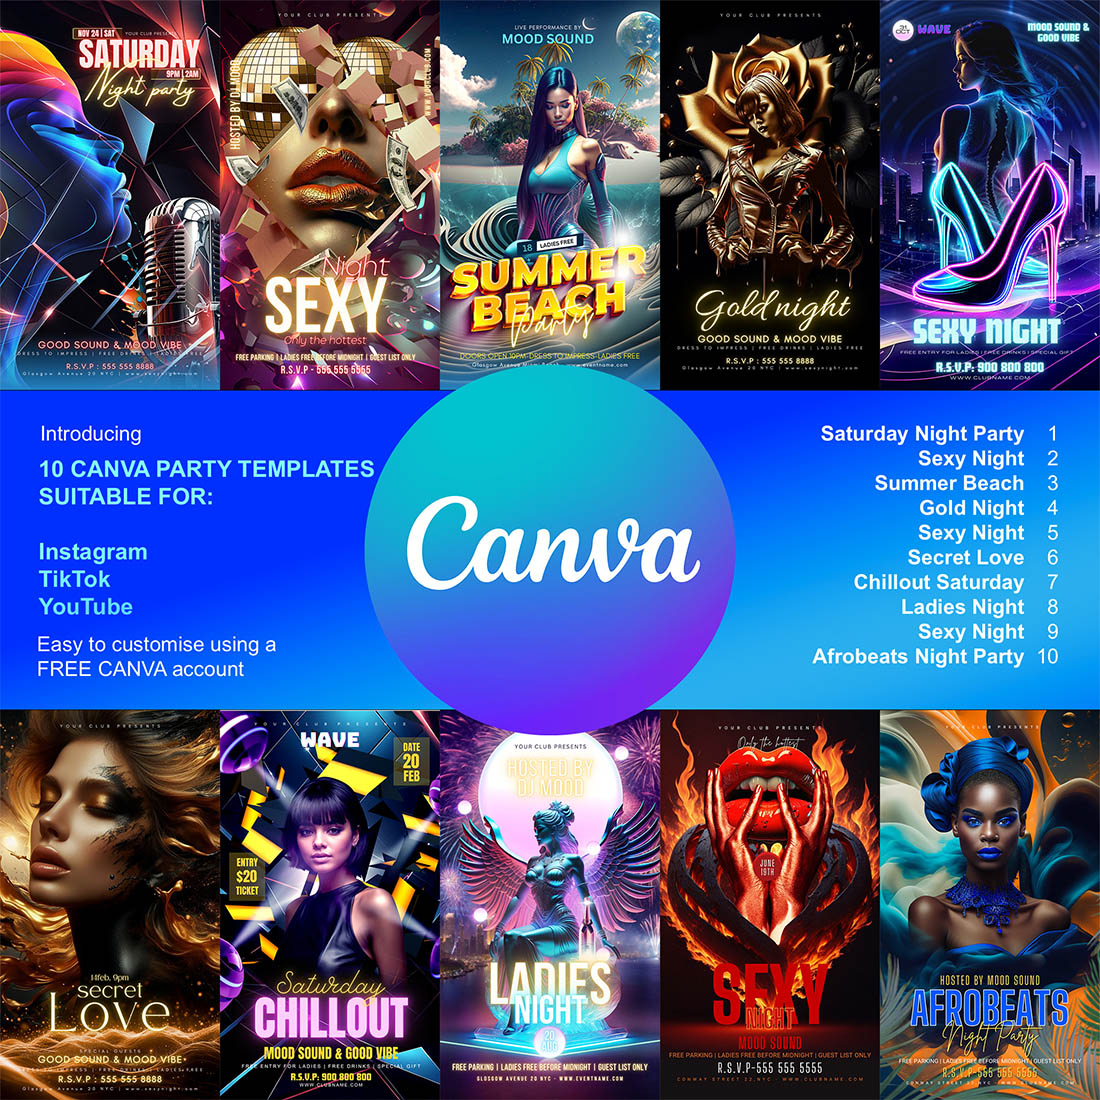 10 Canva Party Templates for Instagram, TikTok and Youtube Promotion cover image.